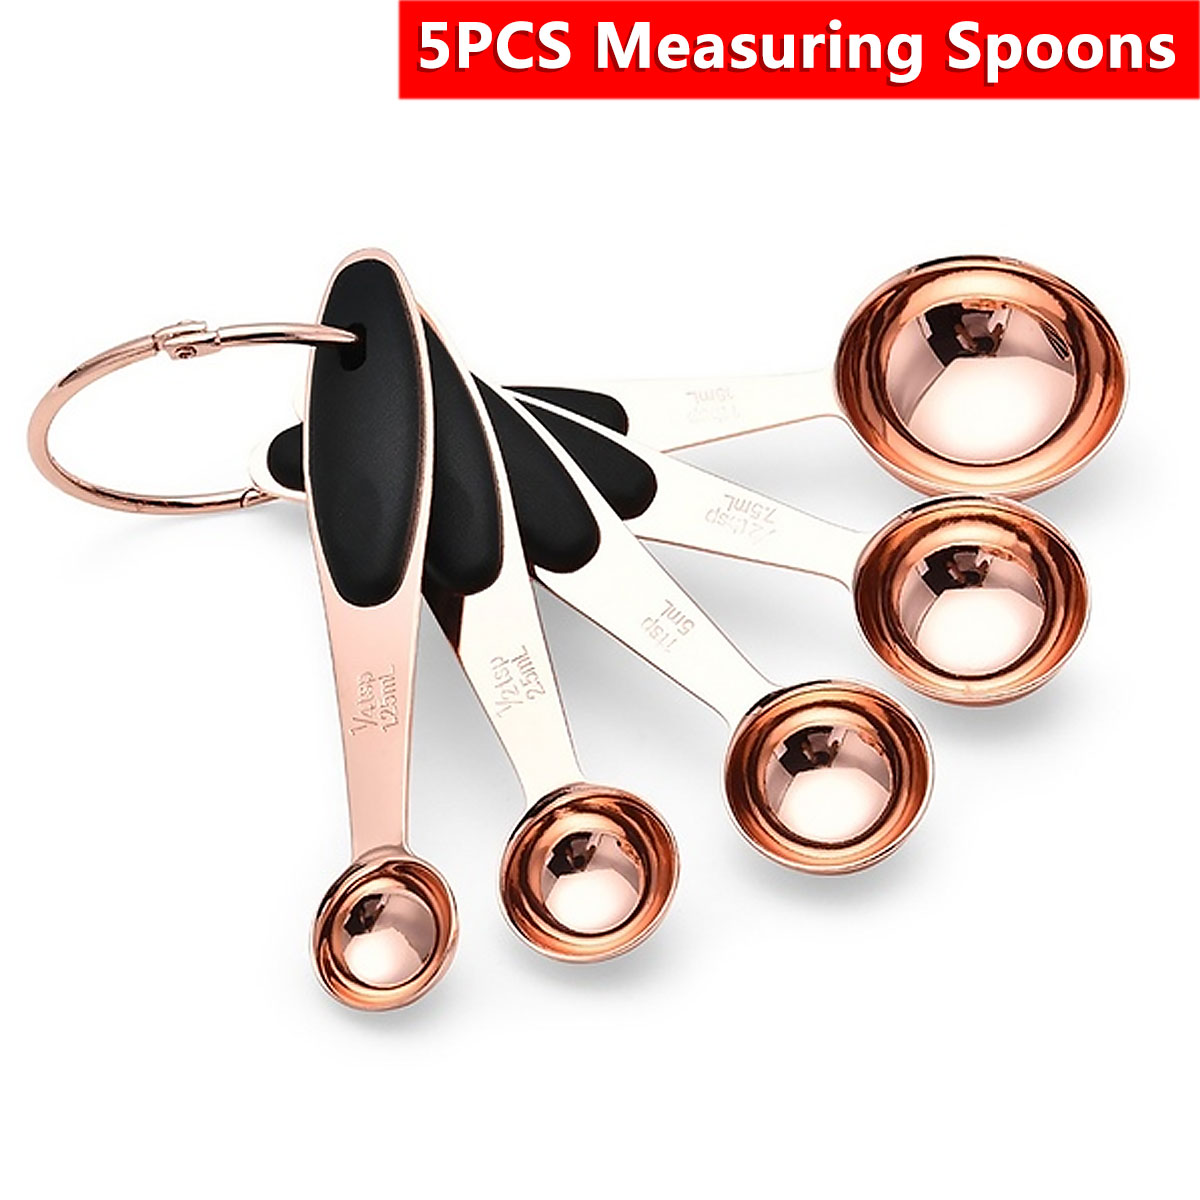 5Pcs-Measuring-Cup-Set-Stainless-Steel-Kitchen-Accessories-Baking-Bartending-Tools-1722150-3